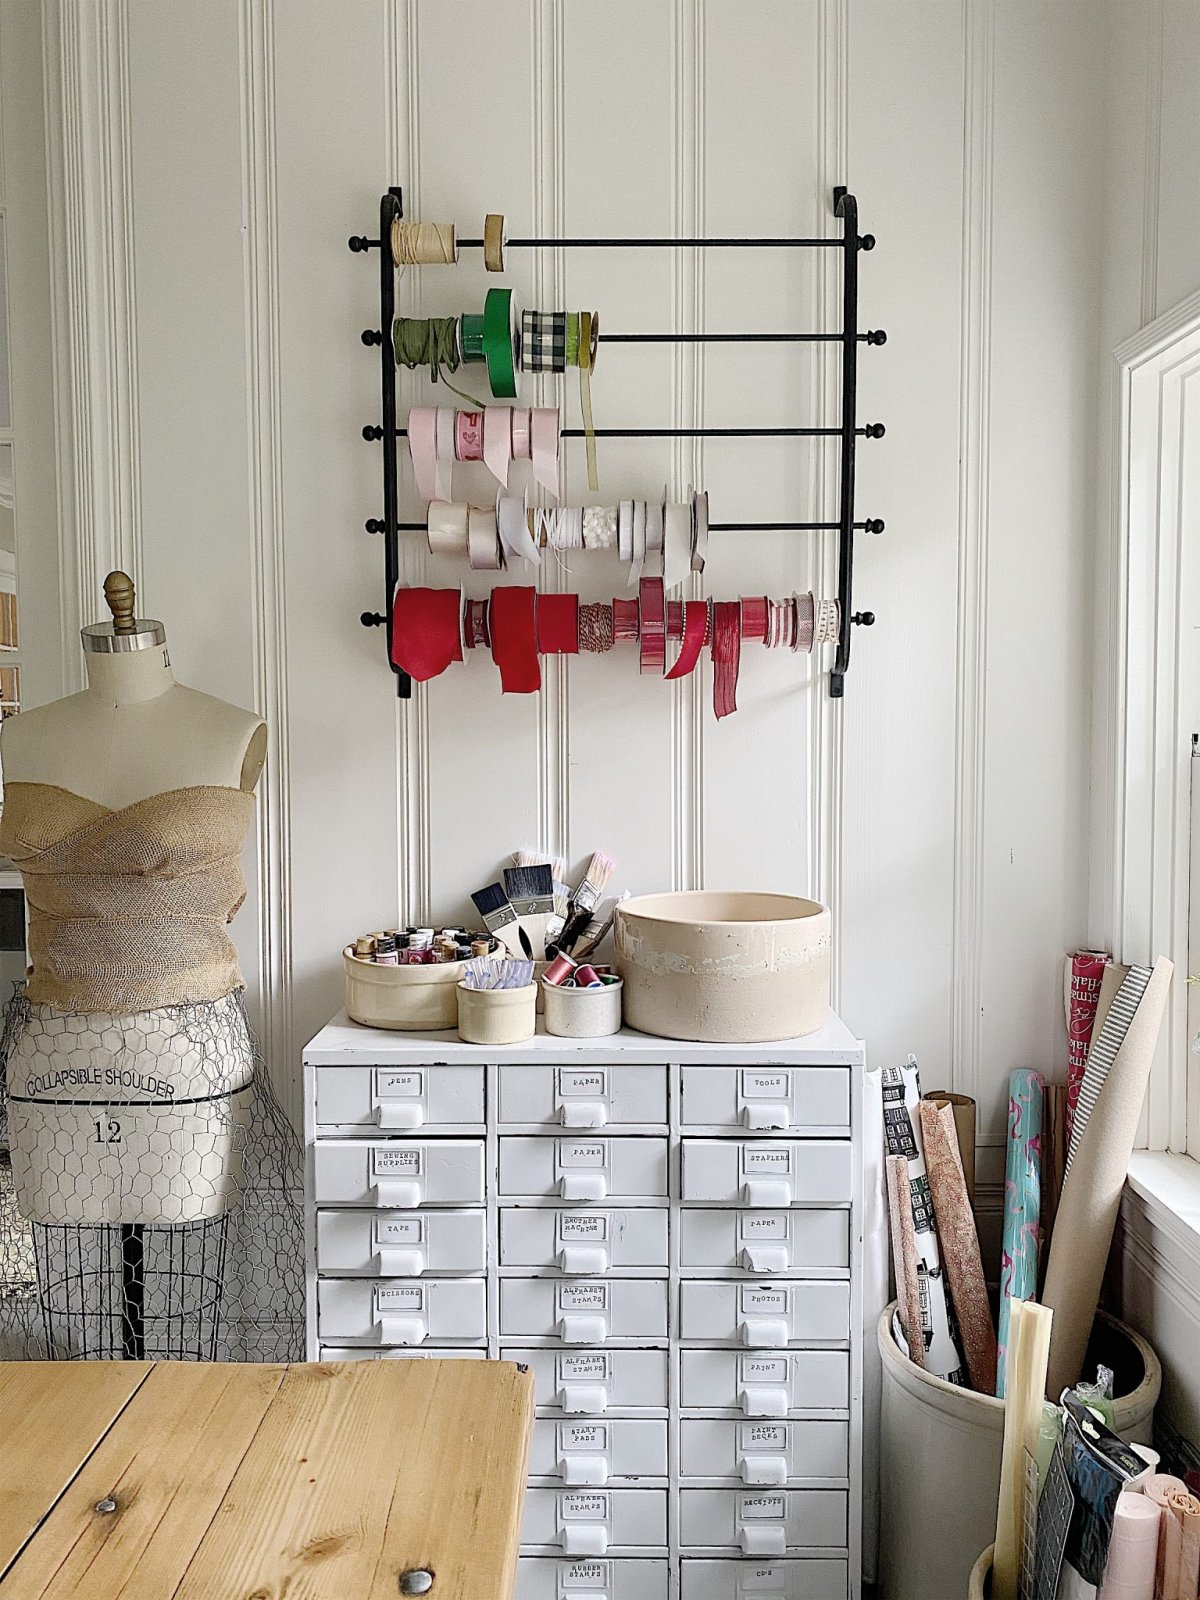 Organize Your Craft Room : How To Store Your Craft Supplies In A Small Space Decor By The Seashore - There is nothing better than feeling inspired in a place where you feel safe.